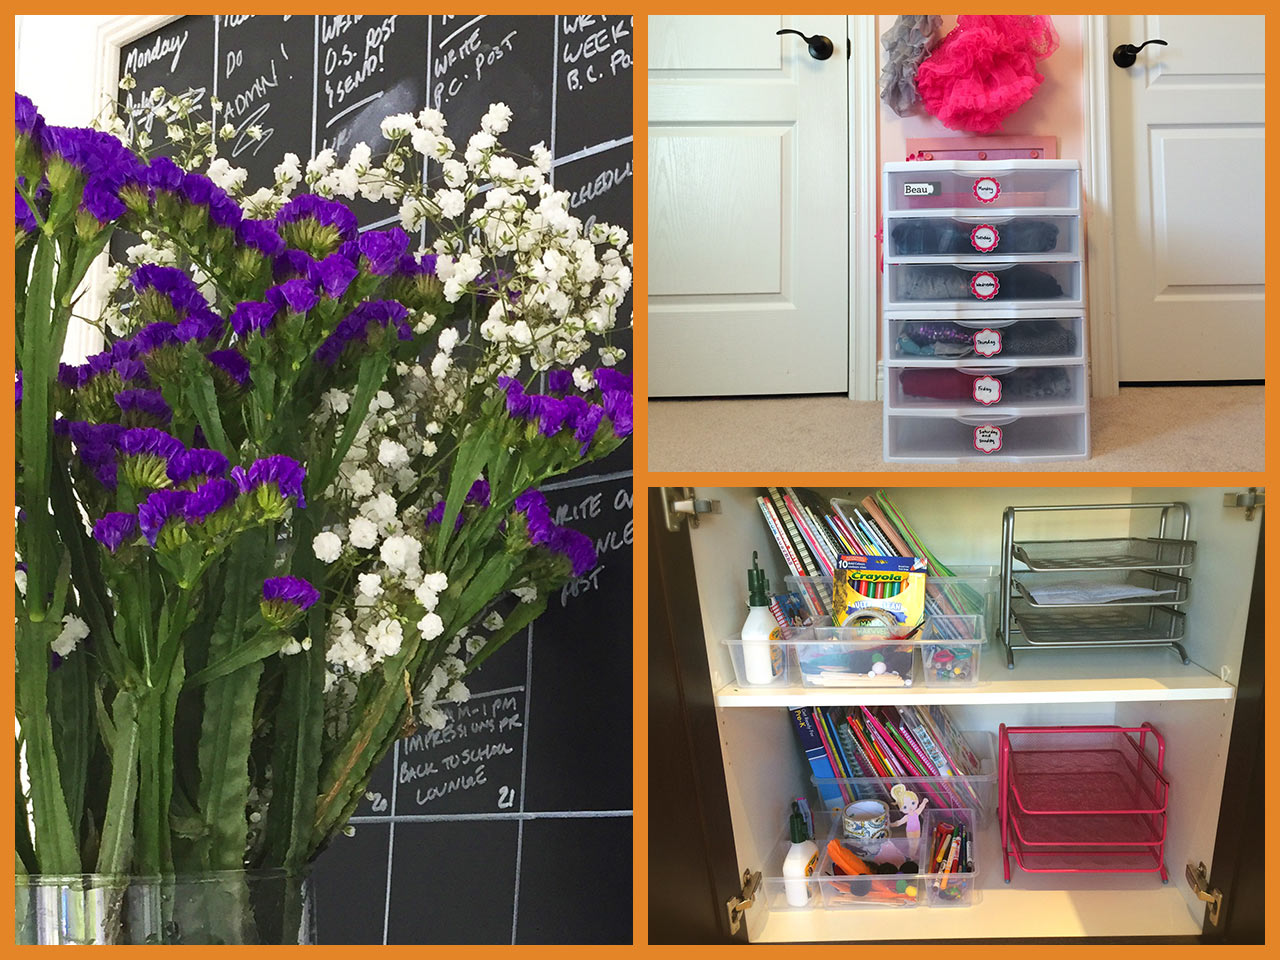 Three-photo collage of organization in Joanna's home: chalkboard calendar, flowers, sorting drawers and cabinet for school supplies